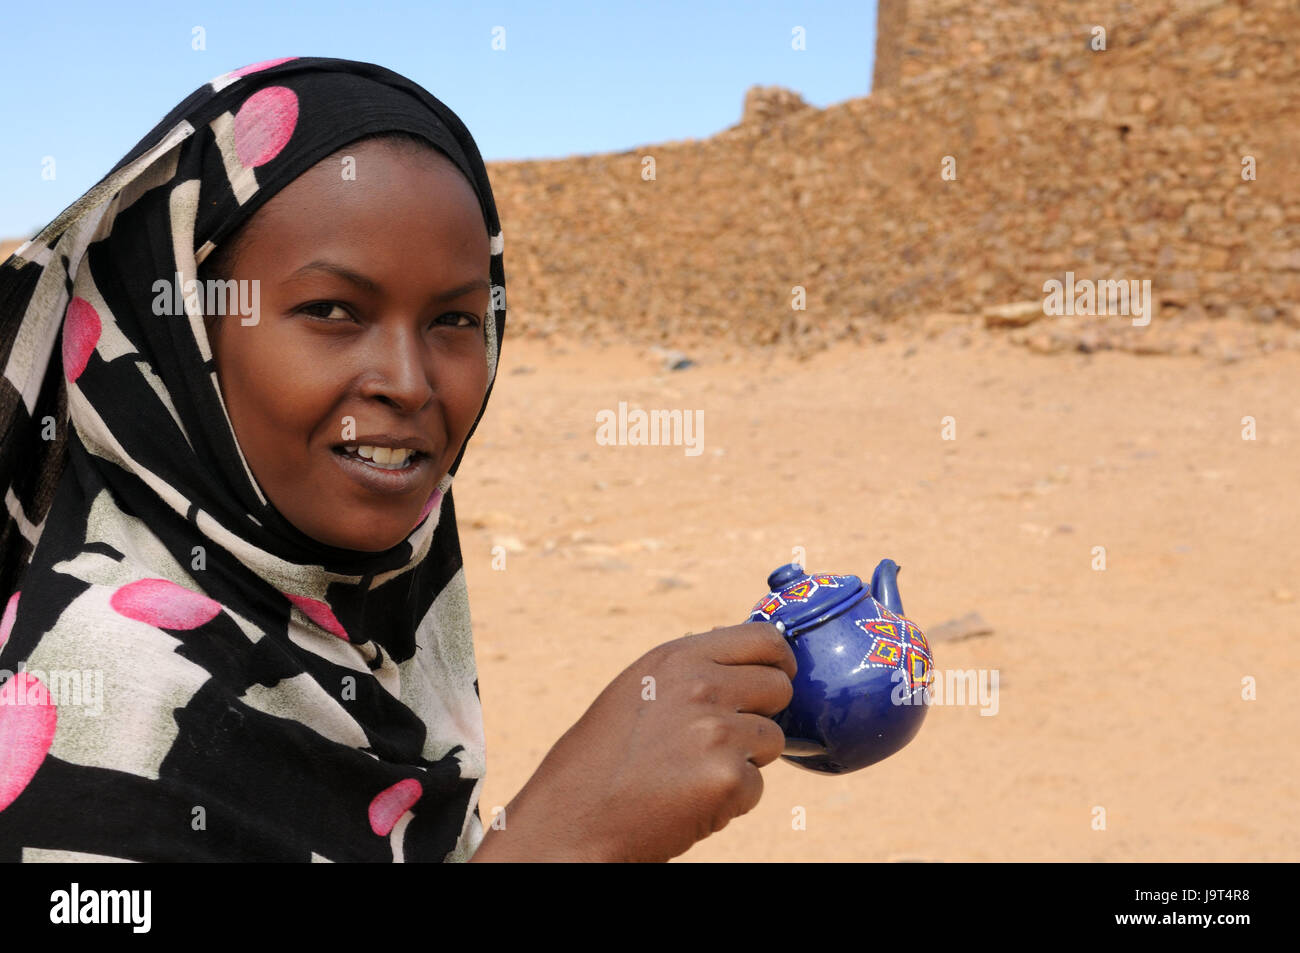 Mauritania,Adrar,Ouadane,ruins,woman,headscarf,pot,hold,portrait,no model release,Africa,West Africa,town,wild town,oasis town,destination,historically,culture,architecture,defensive walls,Sand,UNESCO-world cultural heritage,place of interest,outside,people,locals,non-whites,headgear,friendly,teapot, Stock Photo